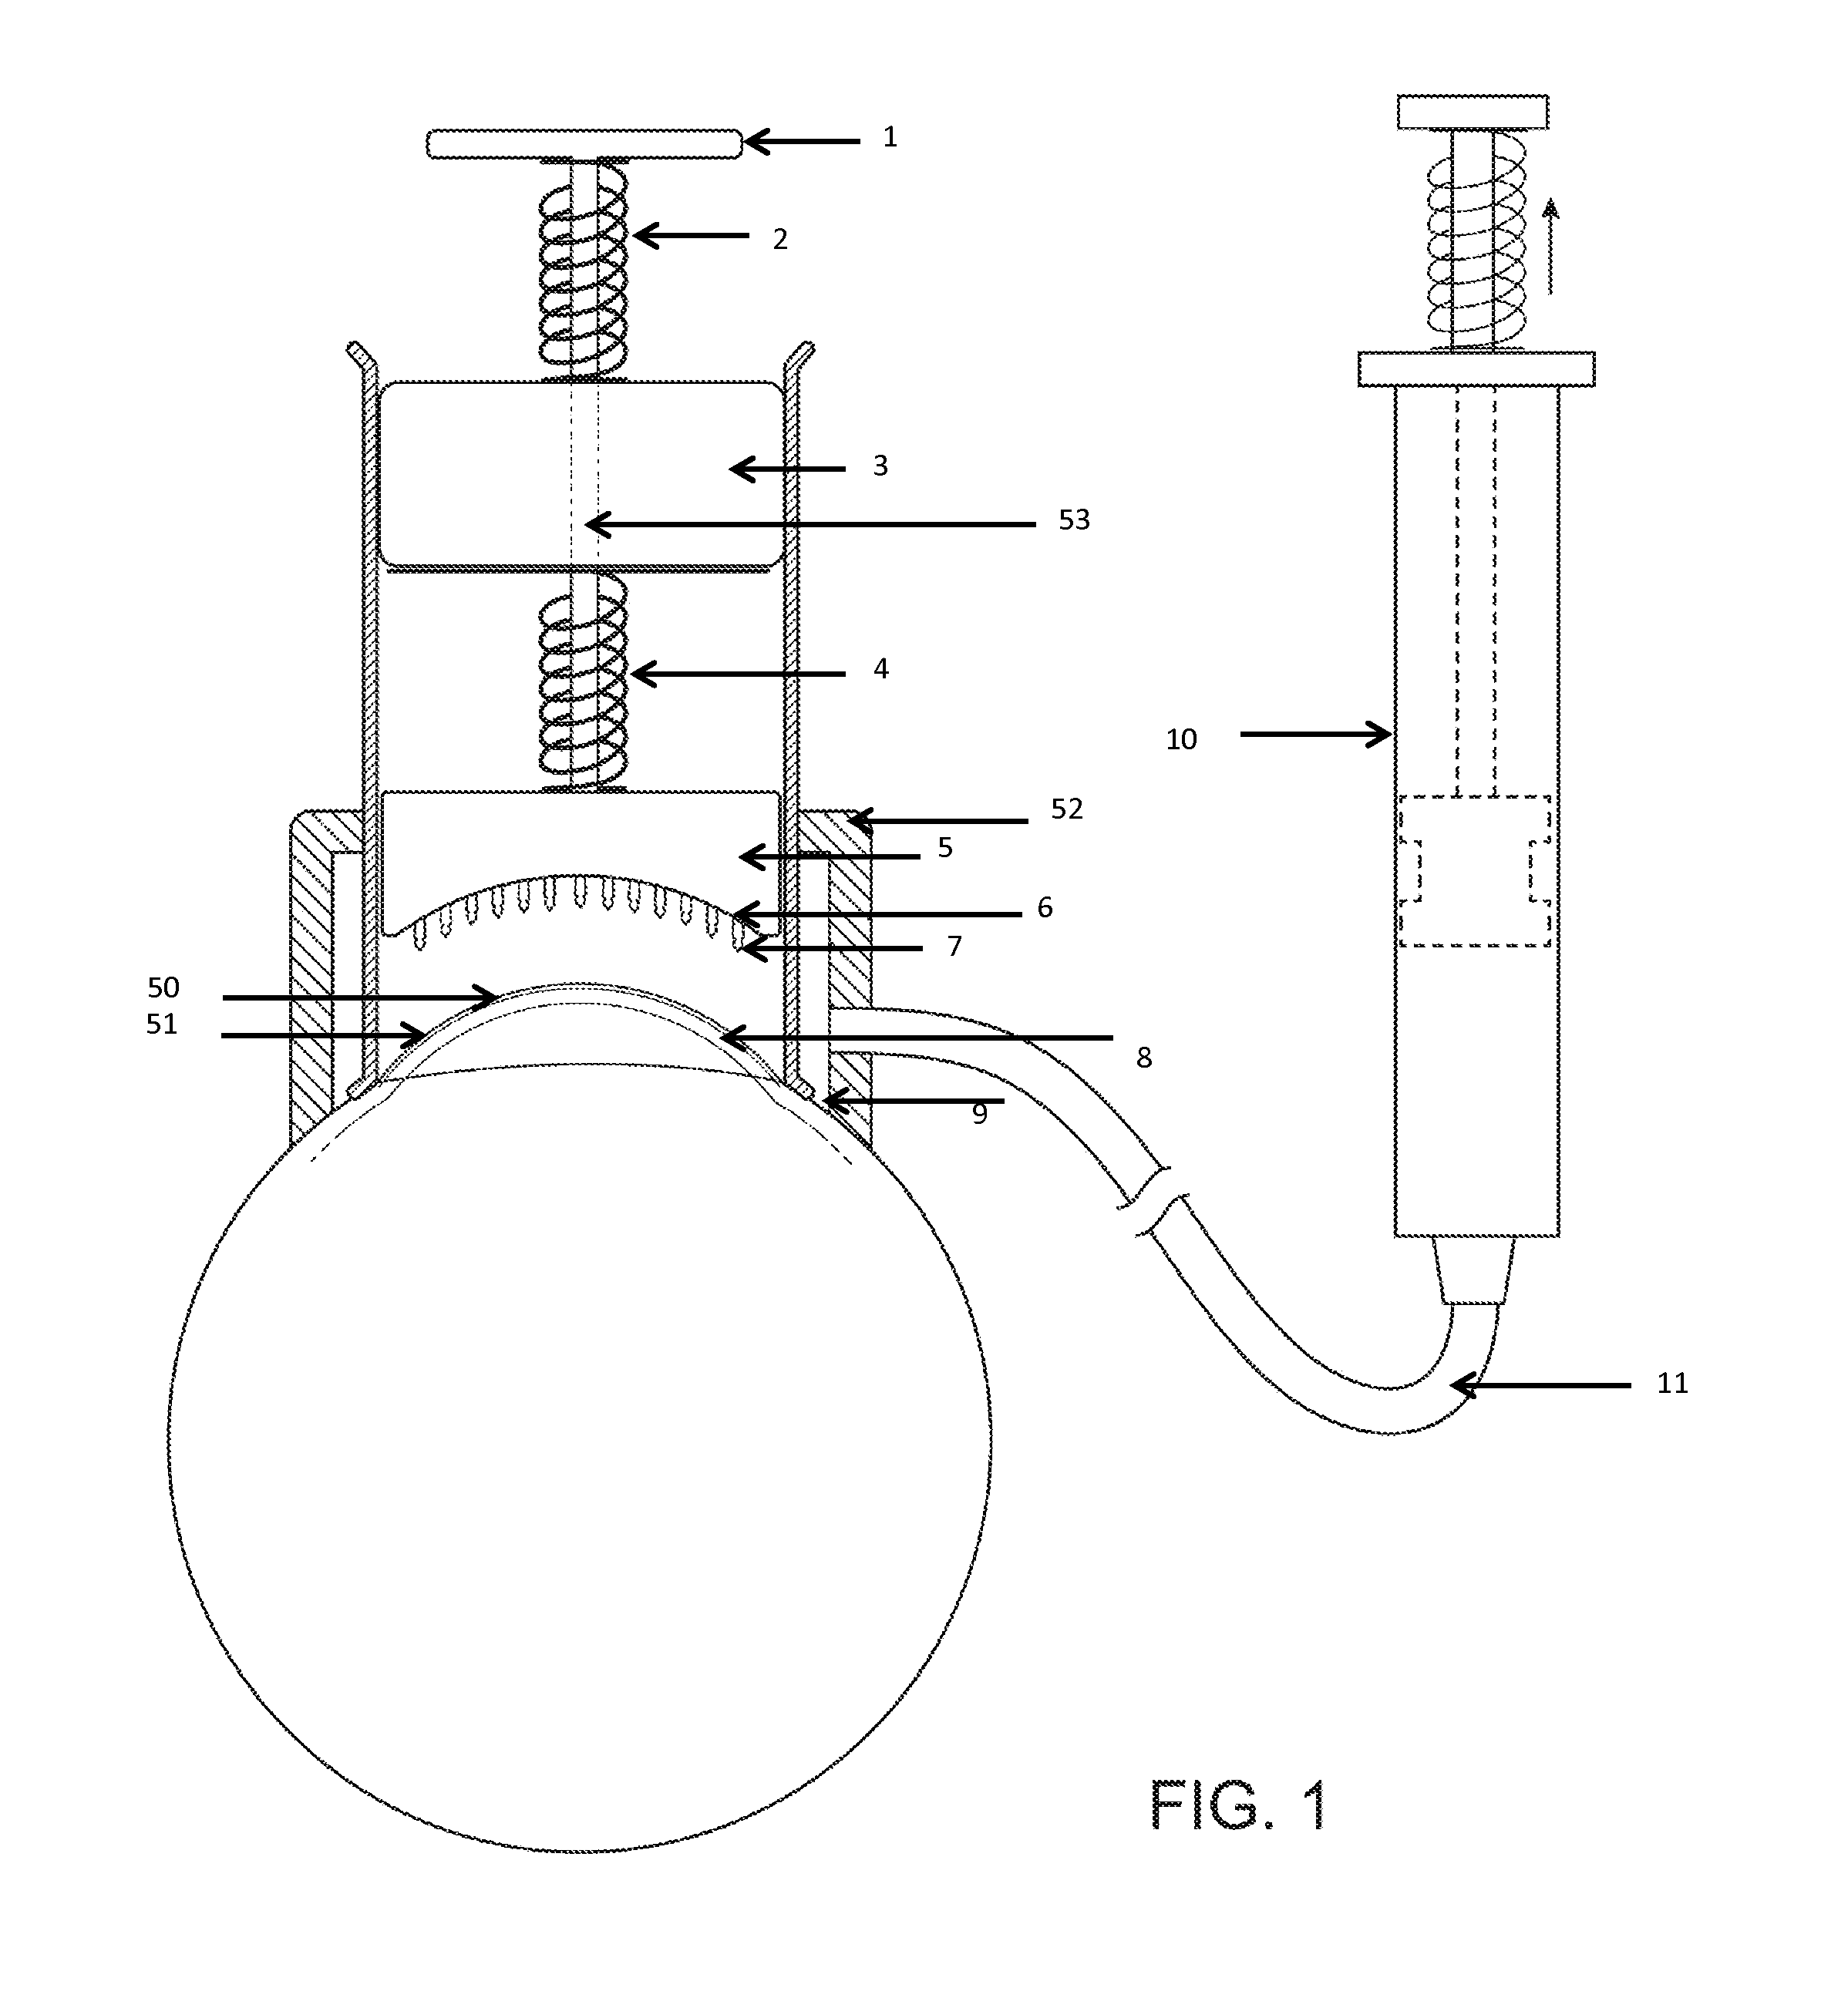 Method and apparatus for the delivery of photo-chemical (cross-linking) treatment to corneal tissue